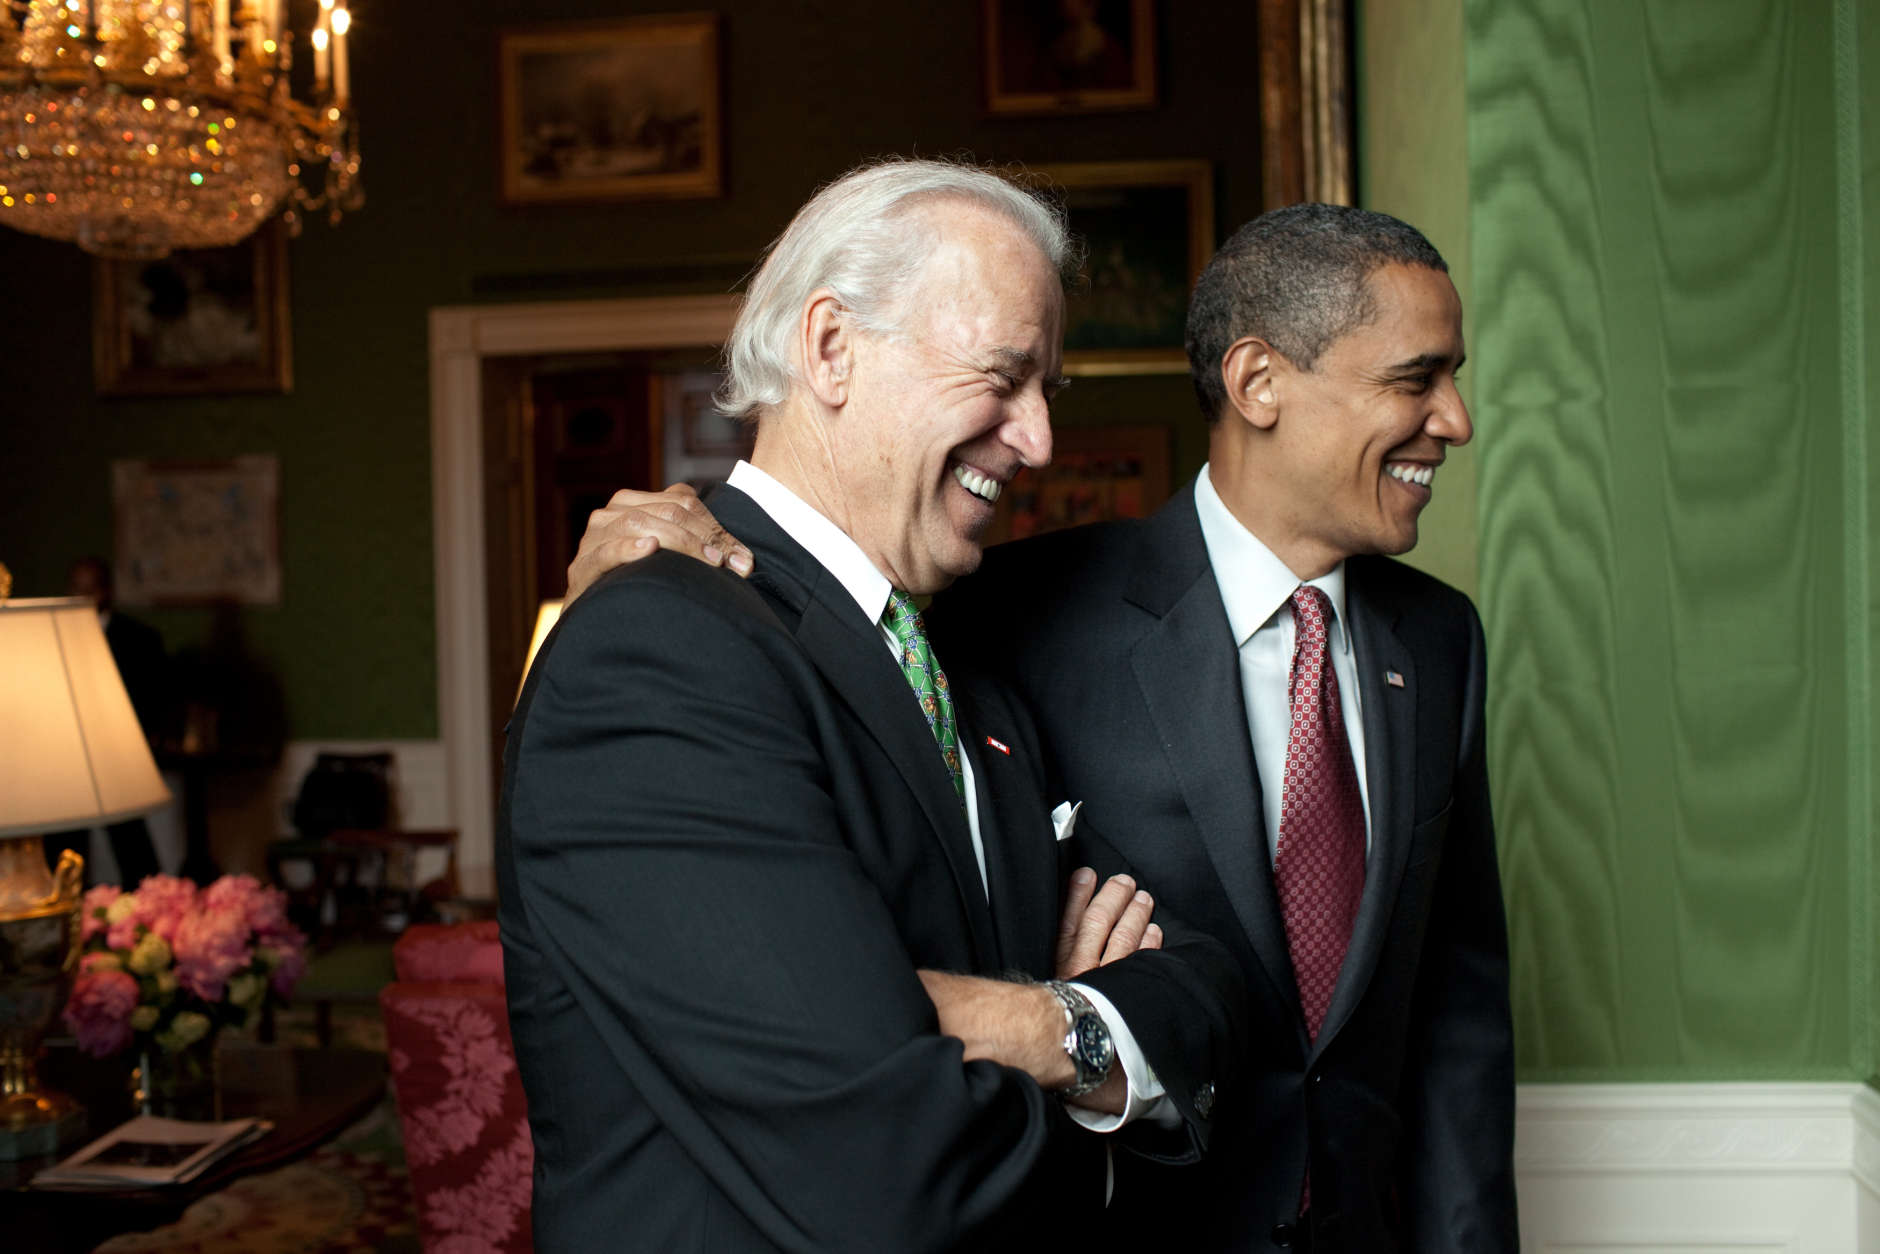 President Barack Obama and Vice President Joe Biden greet participants of the Fatherhood Town Hall in the Green Room at the White House, June 19, 2009. (Official White House Photo by Pete Souza)

This official White House photograph is being made available for publication by news organizations and/or for personal use printing by the subject(s) of the photograph. The photograph may not be manipulated in any way or used in materials, advertisements, products, or promotions that in any way suggest approval or endorsement of the President, the First Family, or the White House.